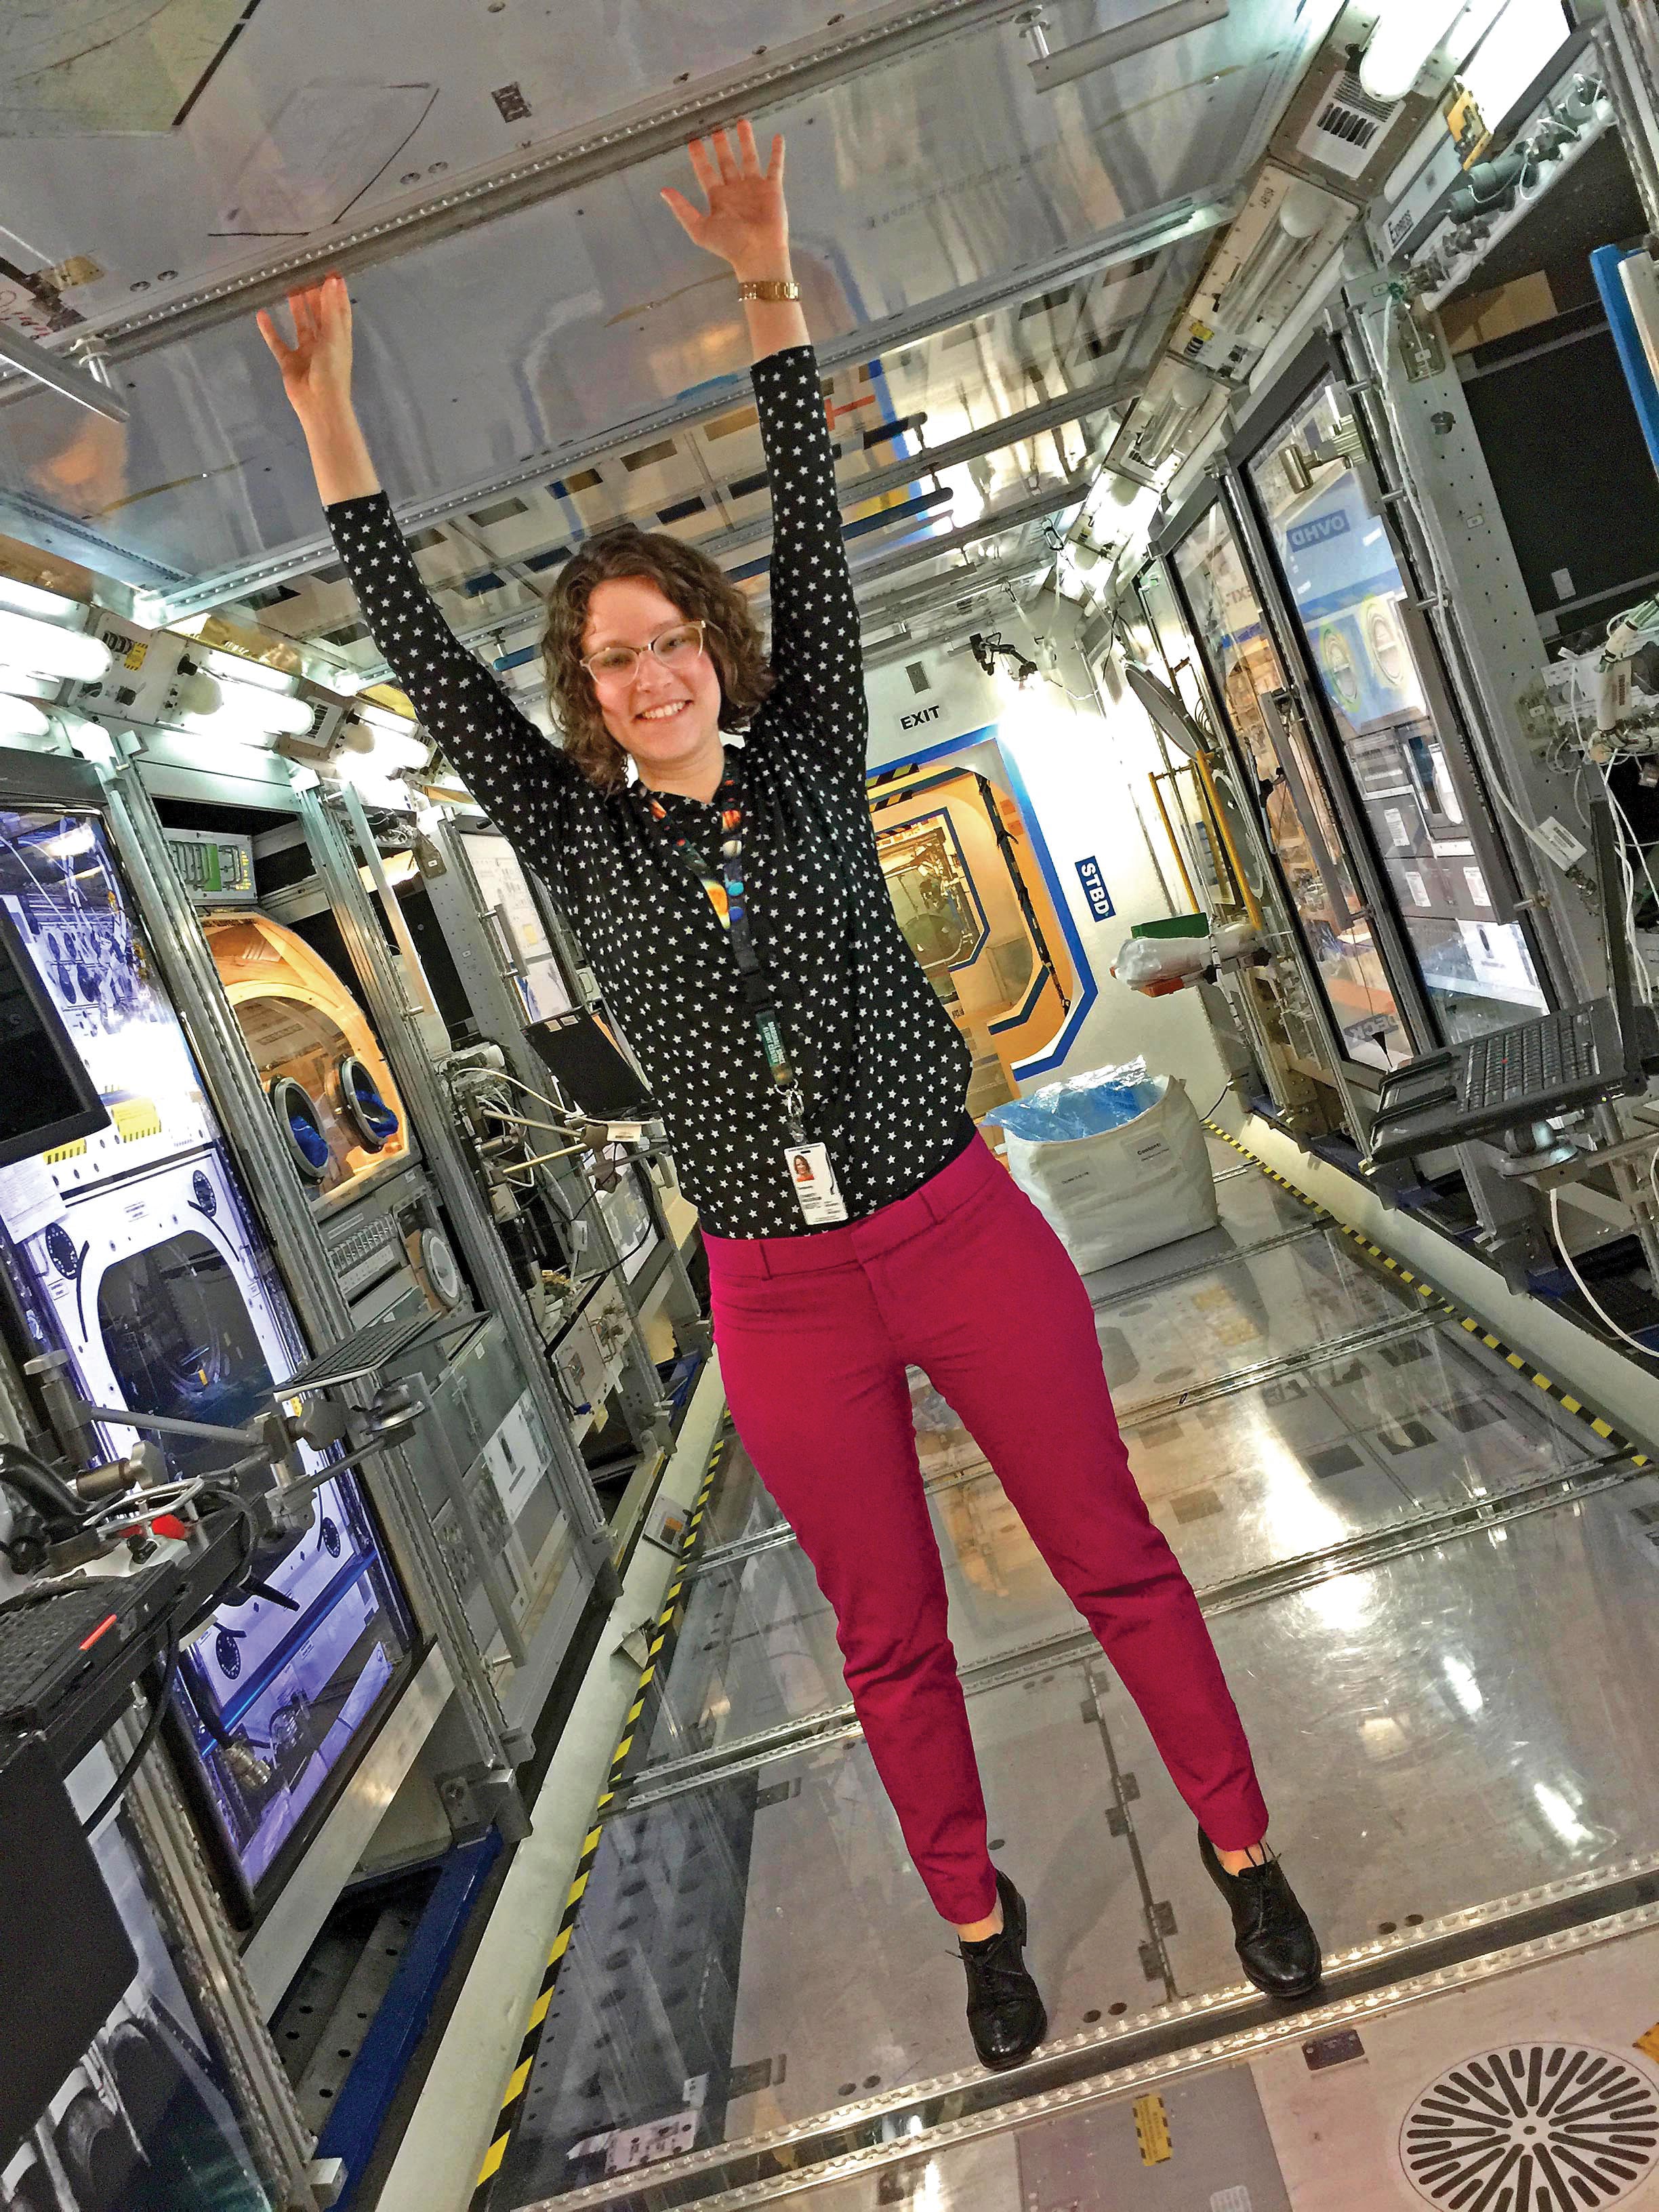 Charity Woodrum standing on tiptoes and touching the ceiling inside of a space-station laboratory mockup.